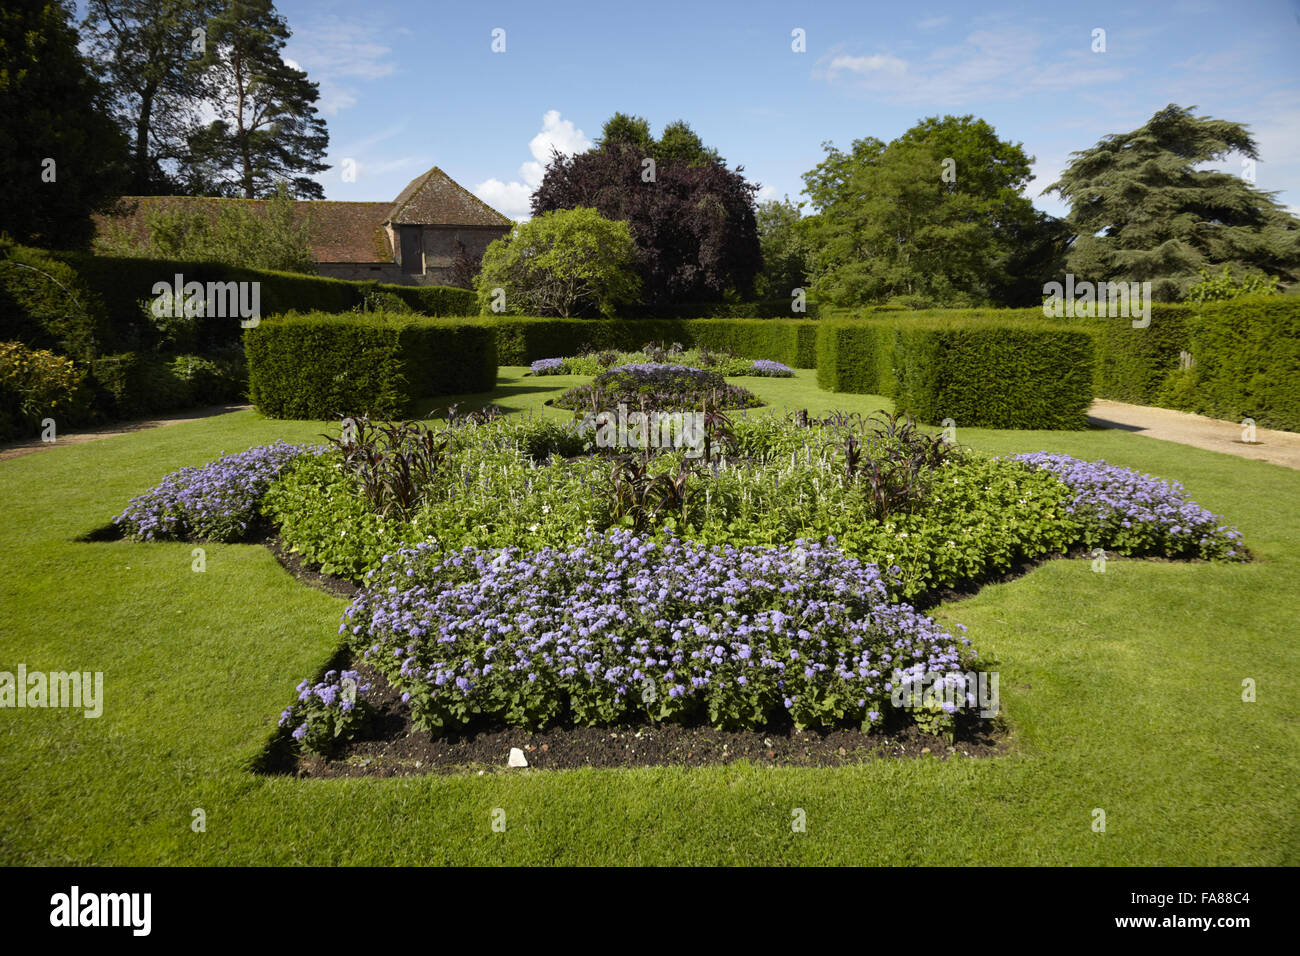 The garden in July at The Vyne, Hampshire. Stock Photo